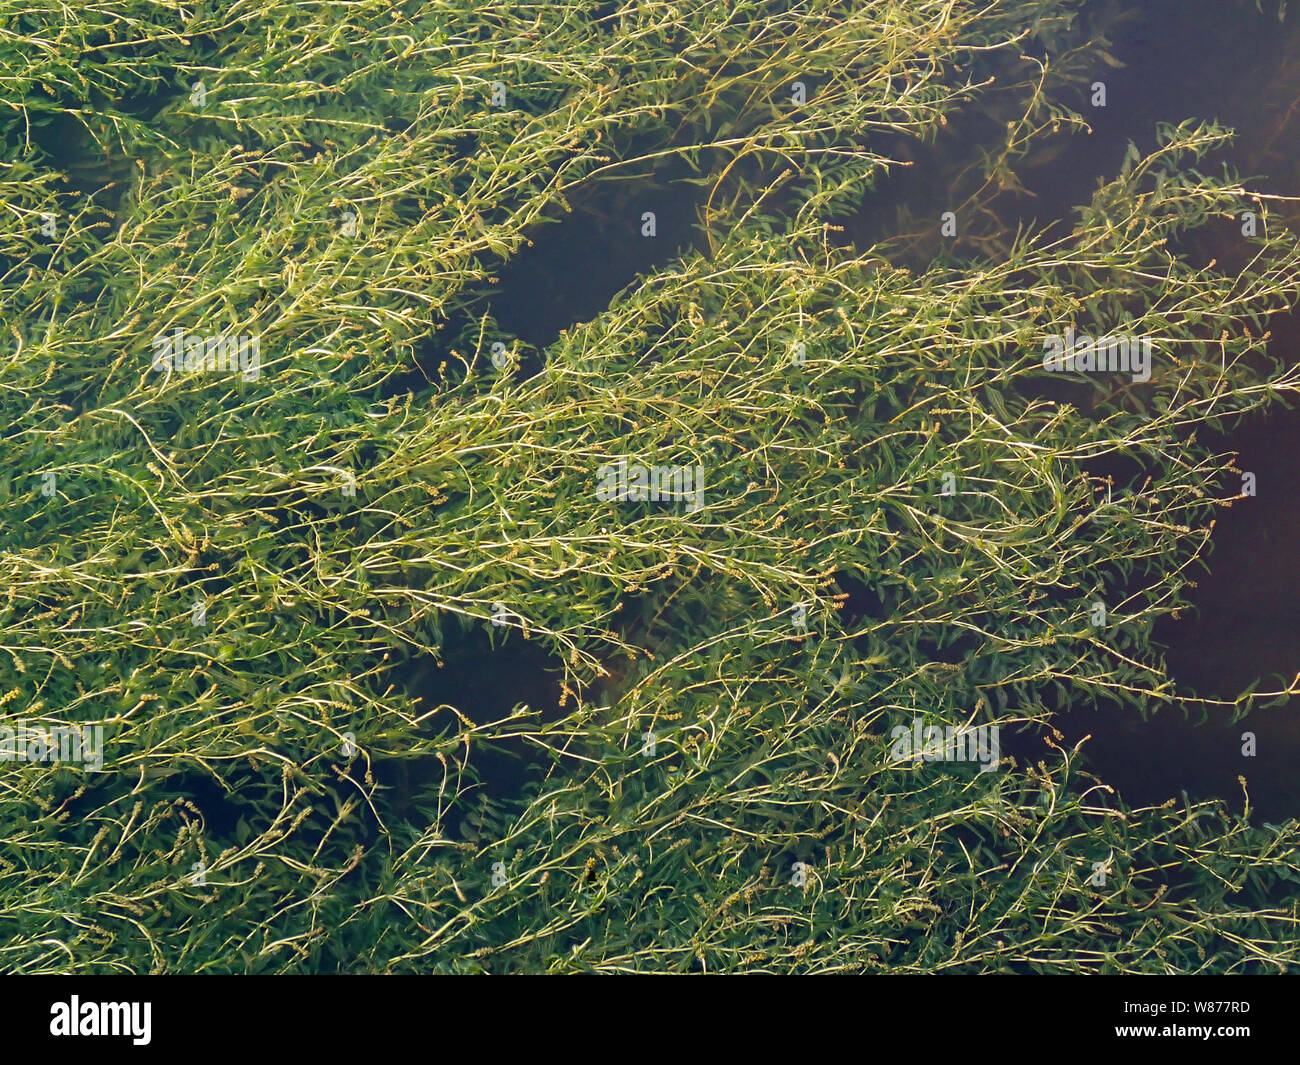 Swamp background, texture of green algae in water Stock Photo